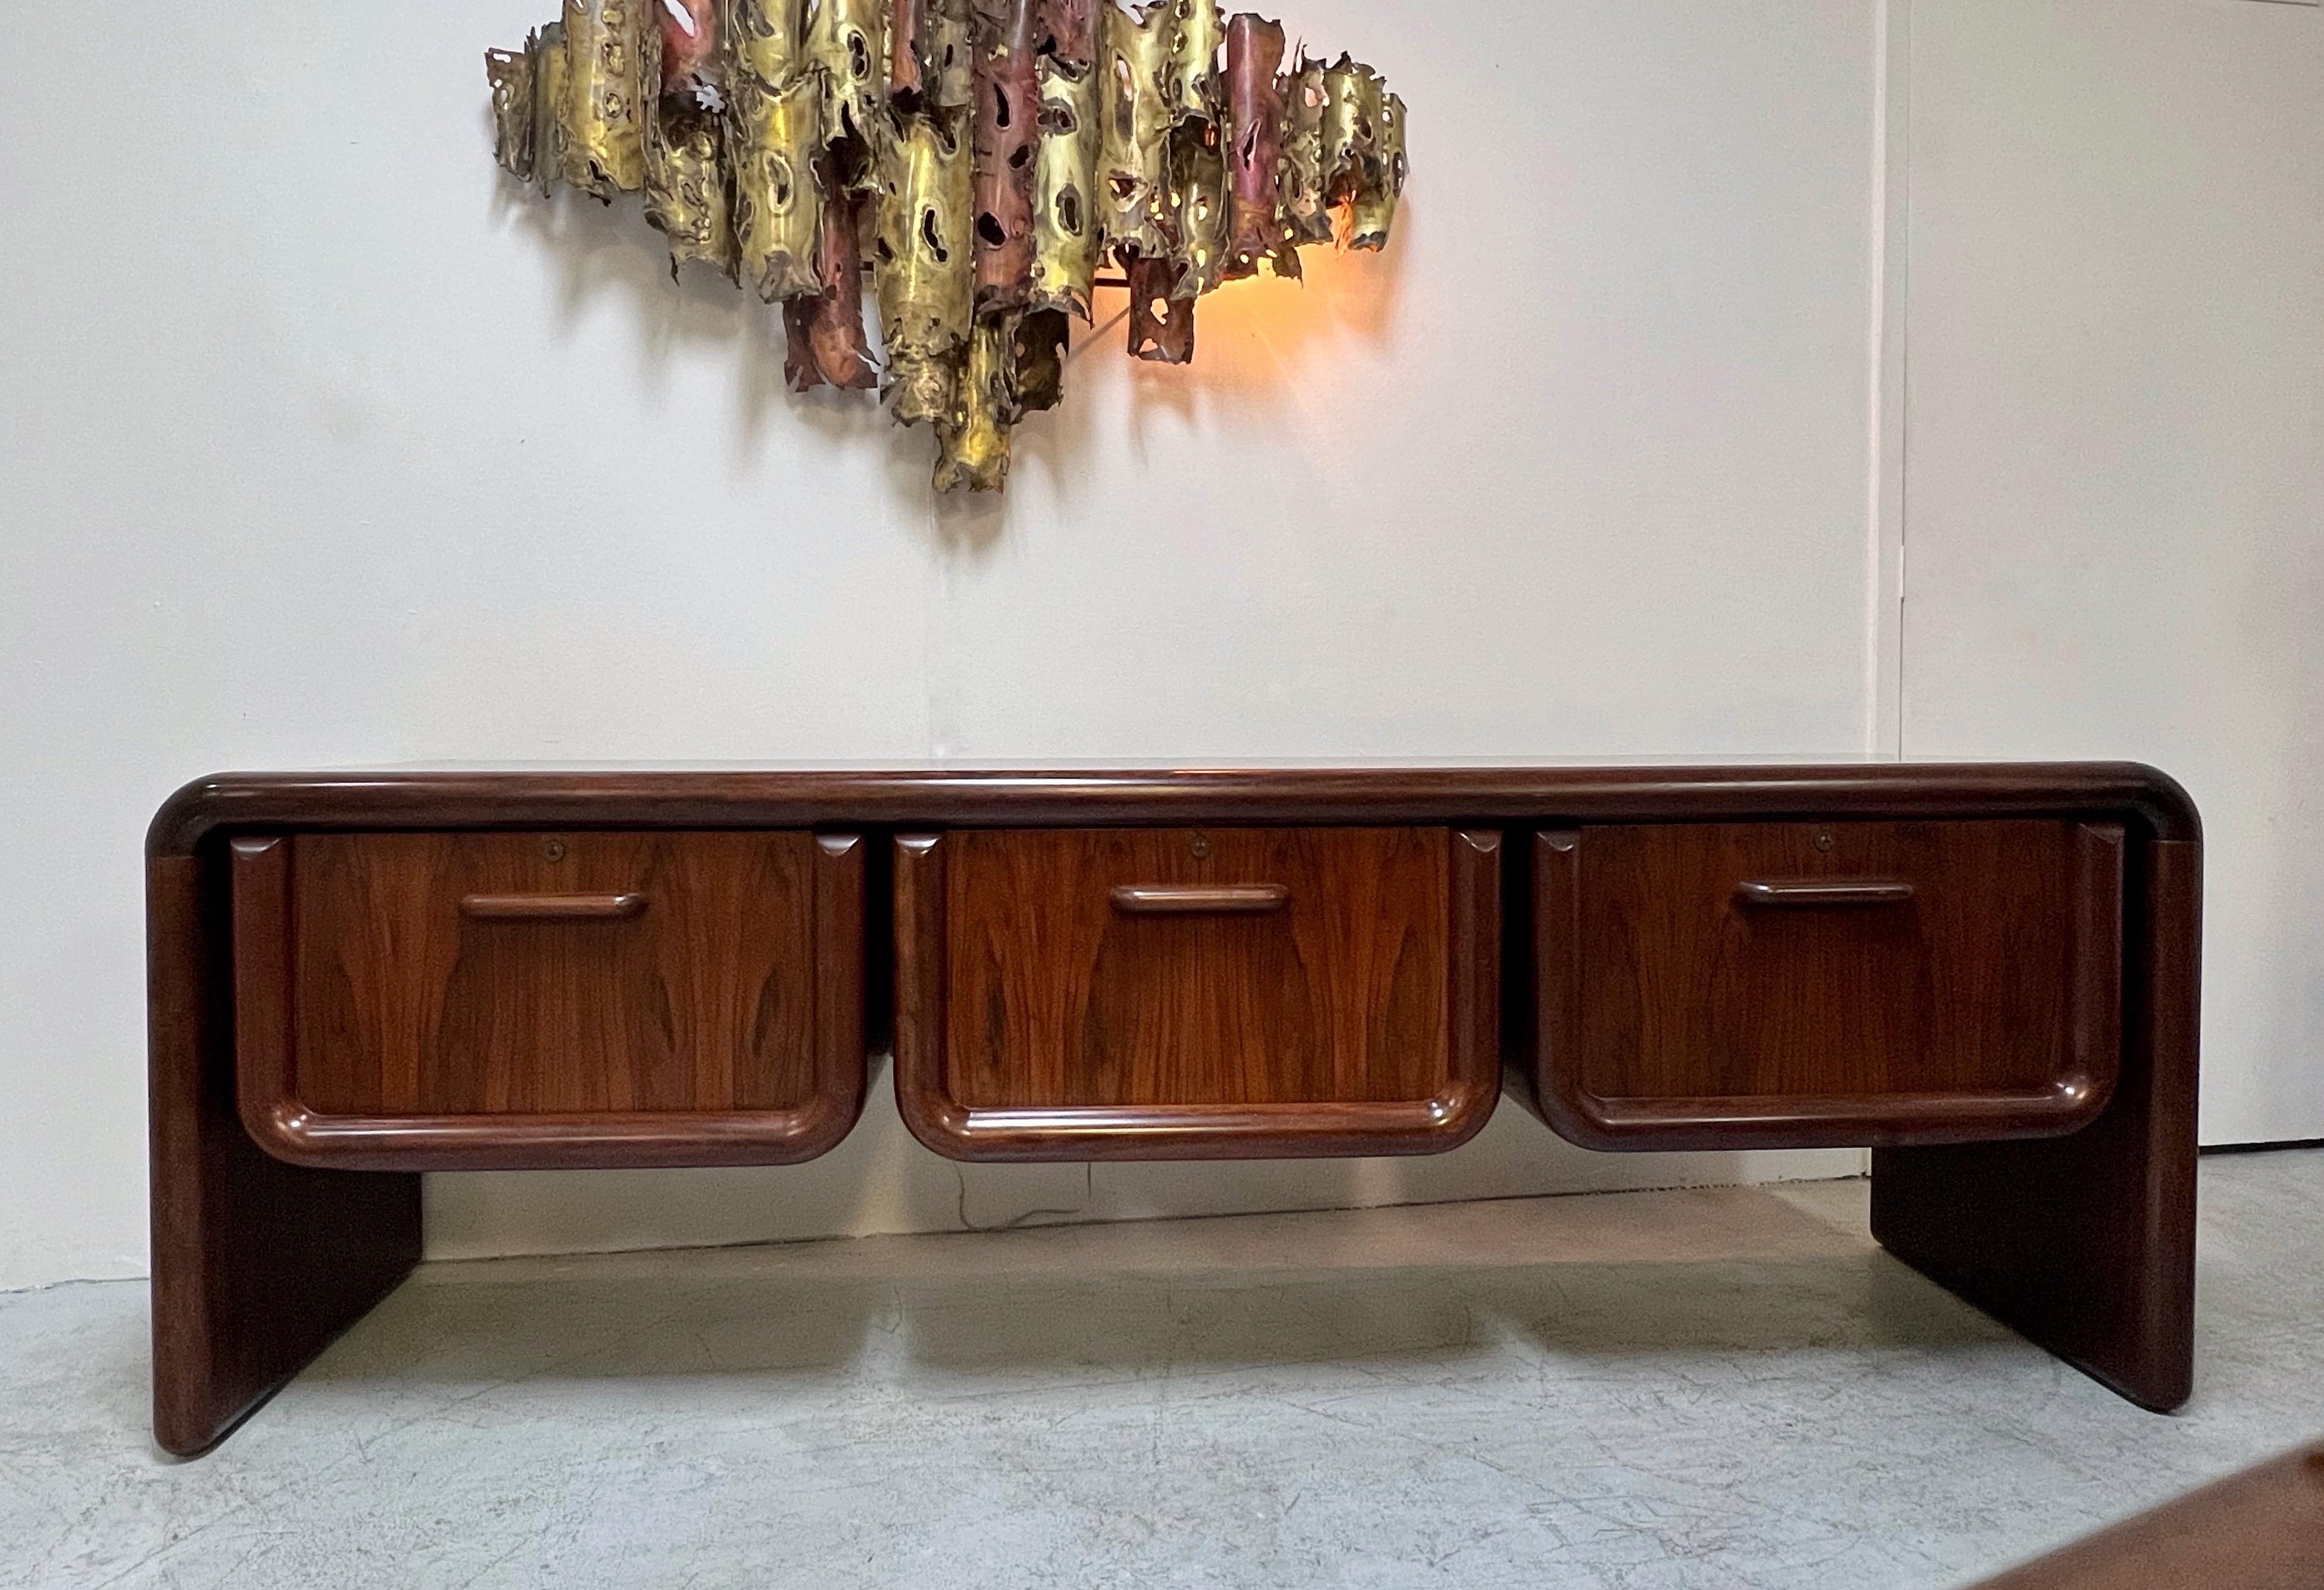 A large and handsome cabinet. The thick rounded edges are solid wood as are the pulls on the deep drawers. Beautiful active grain on all surfaces. Very solid sturdy piece of furniture.